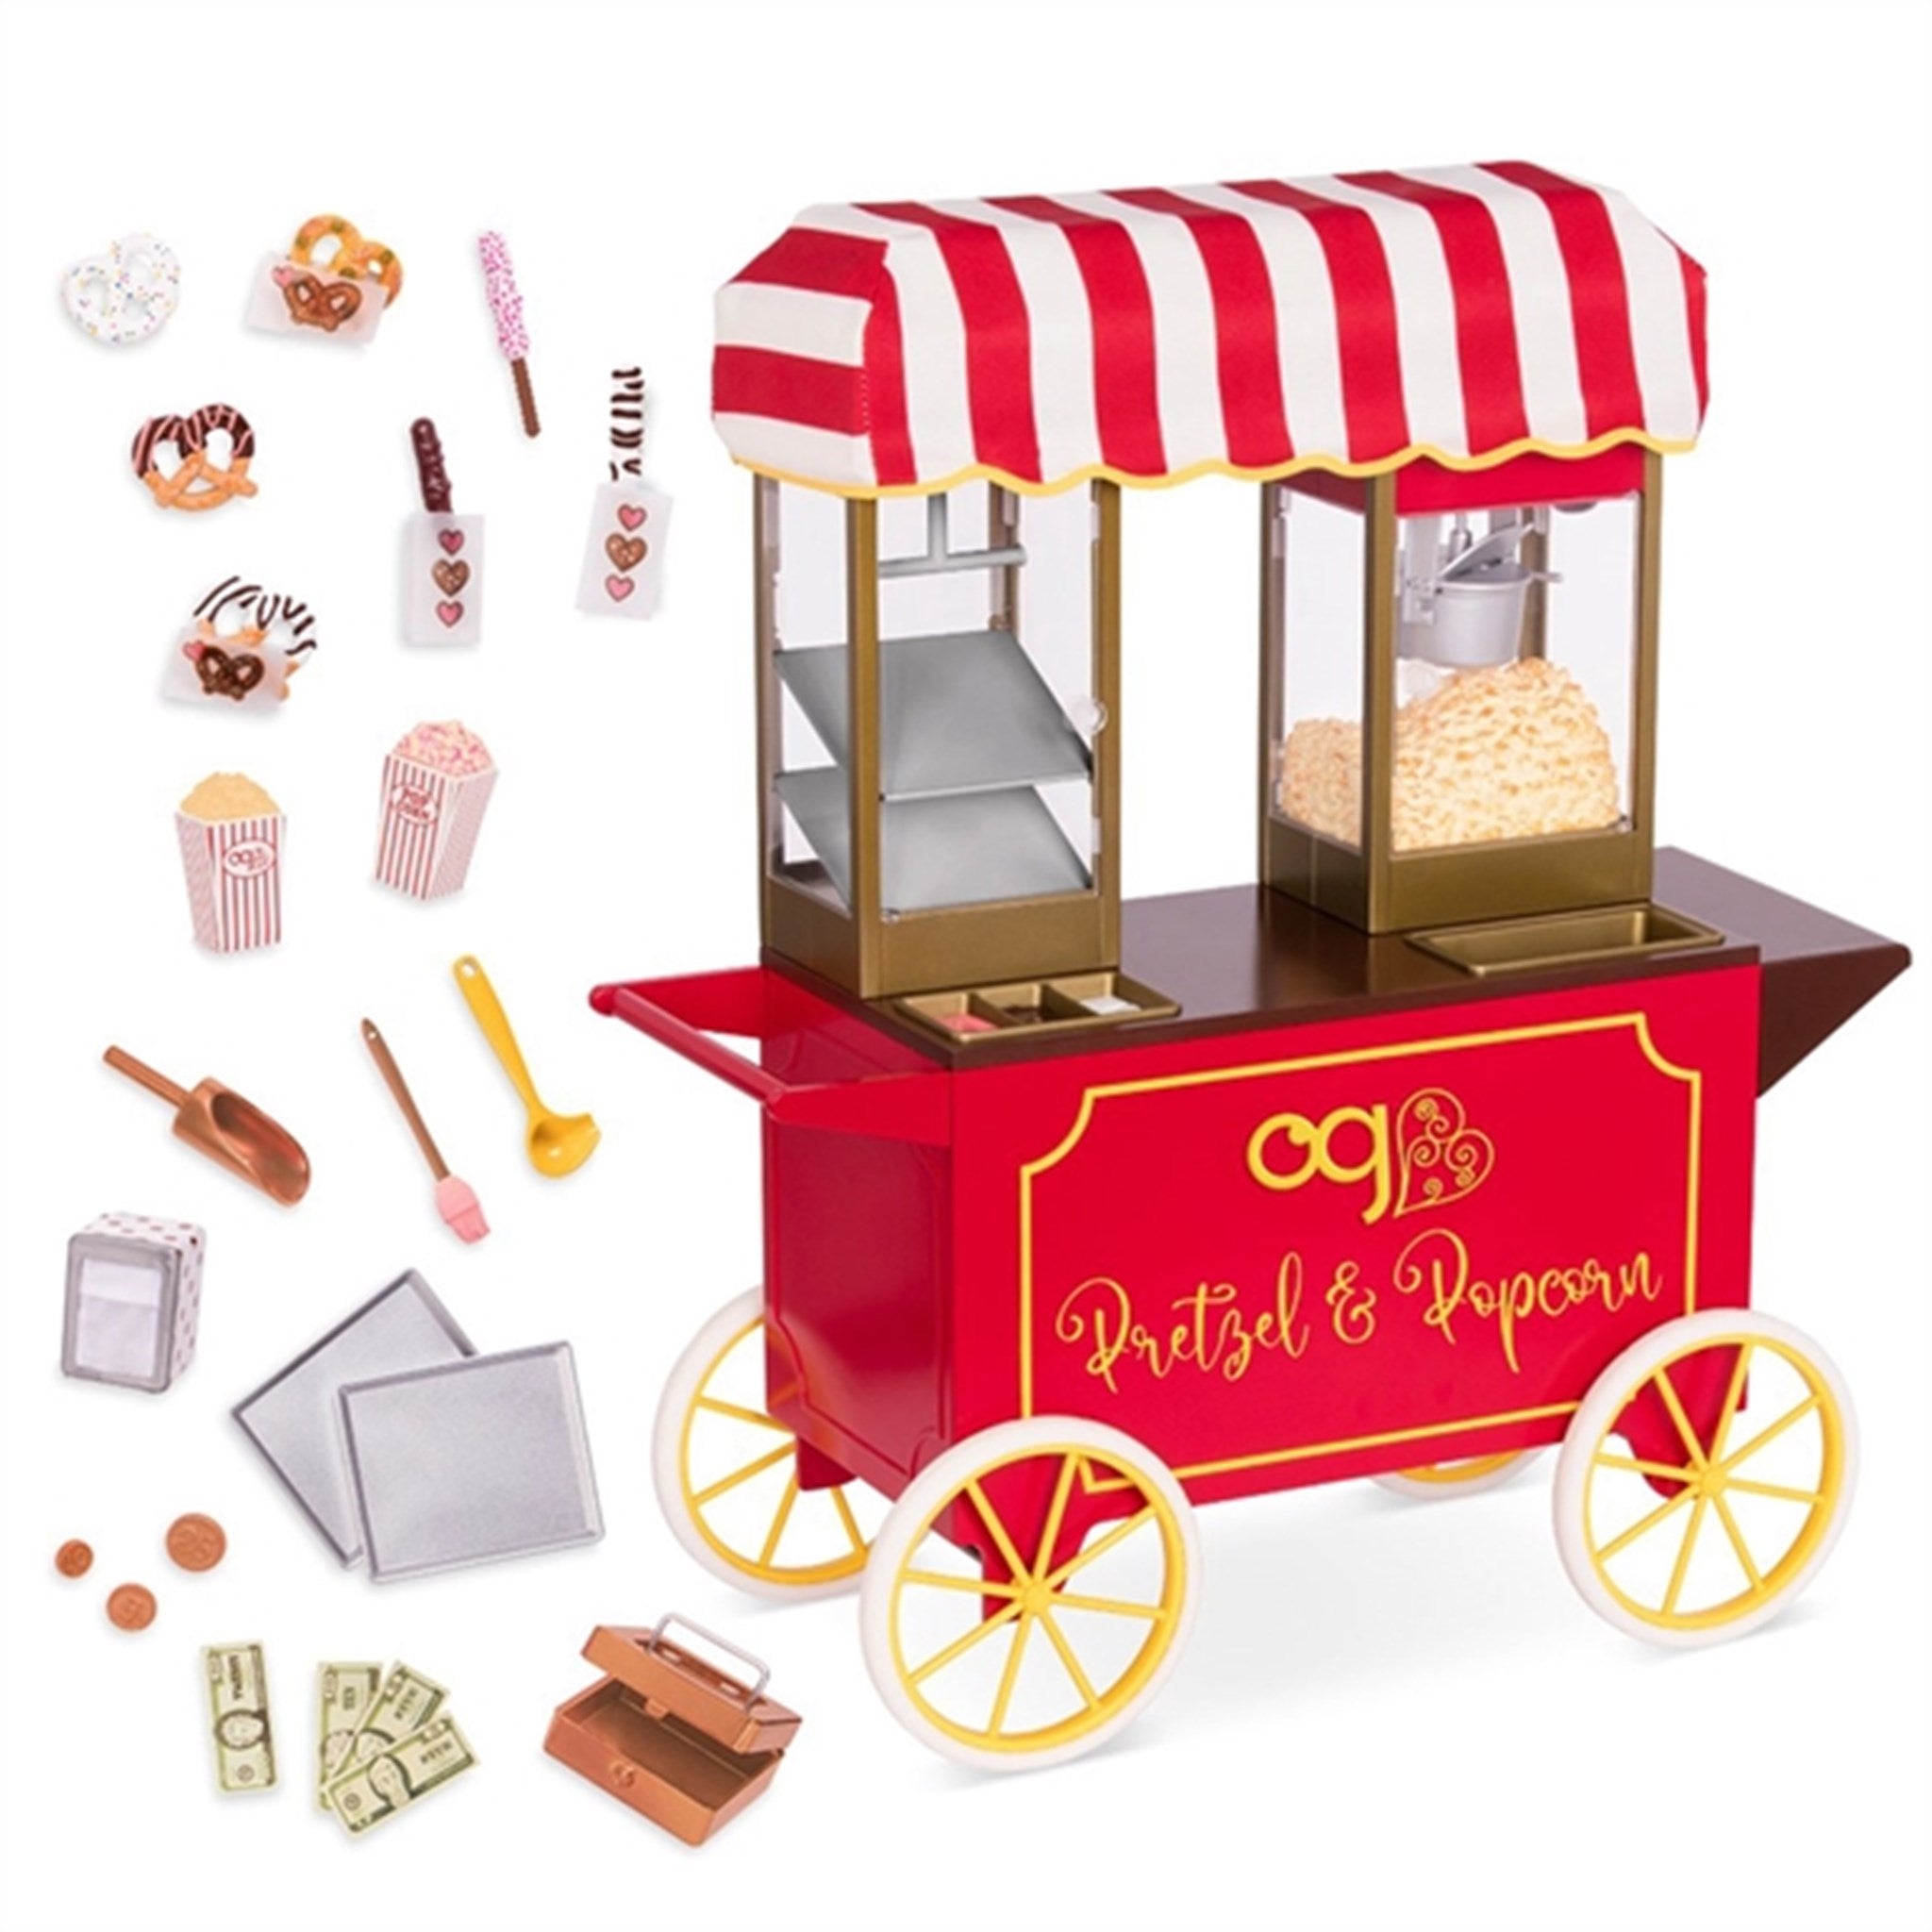 Our Generation Pastry and Popcorn Truck 3